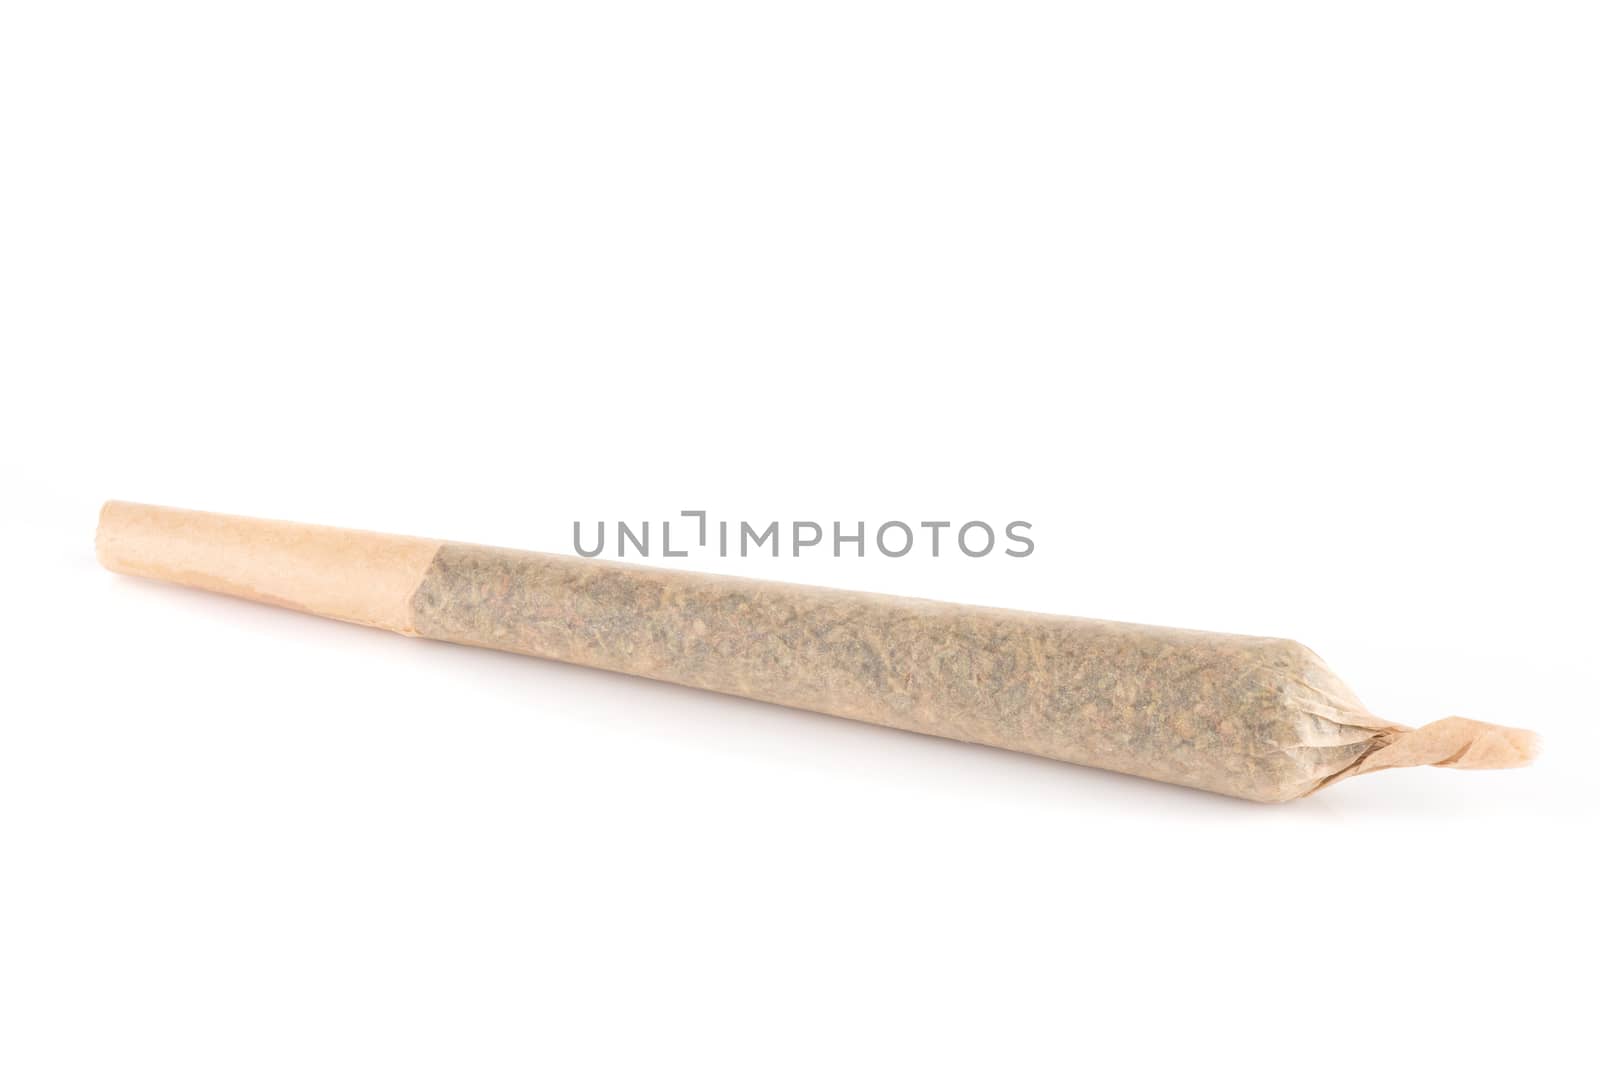 Medical Marijuana Rolled Up Joint Close Up View on White Background.